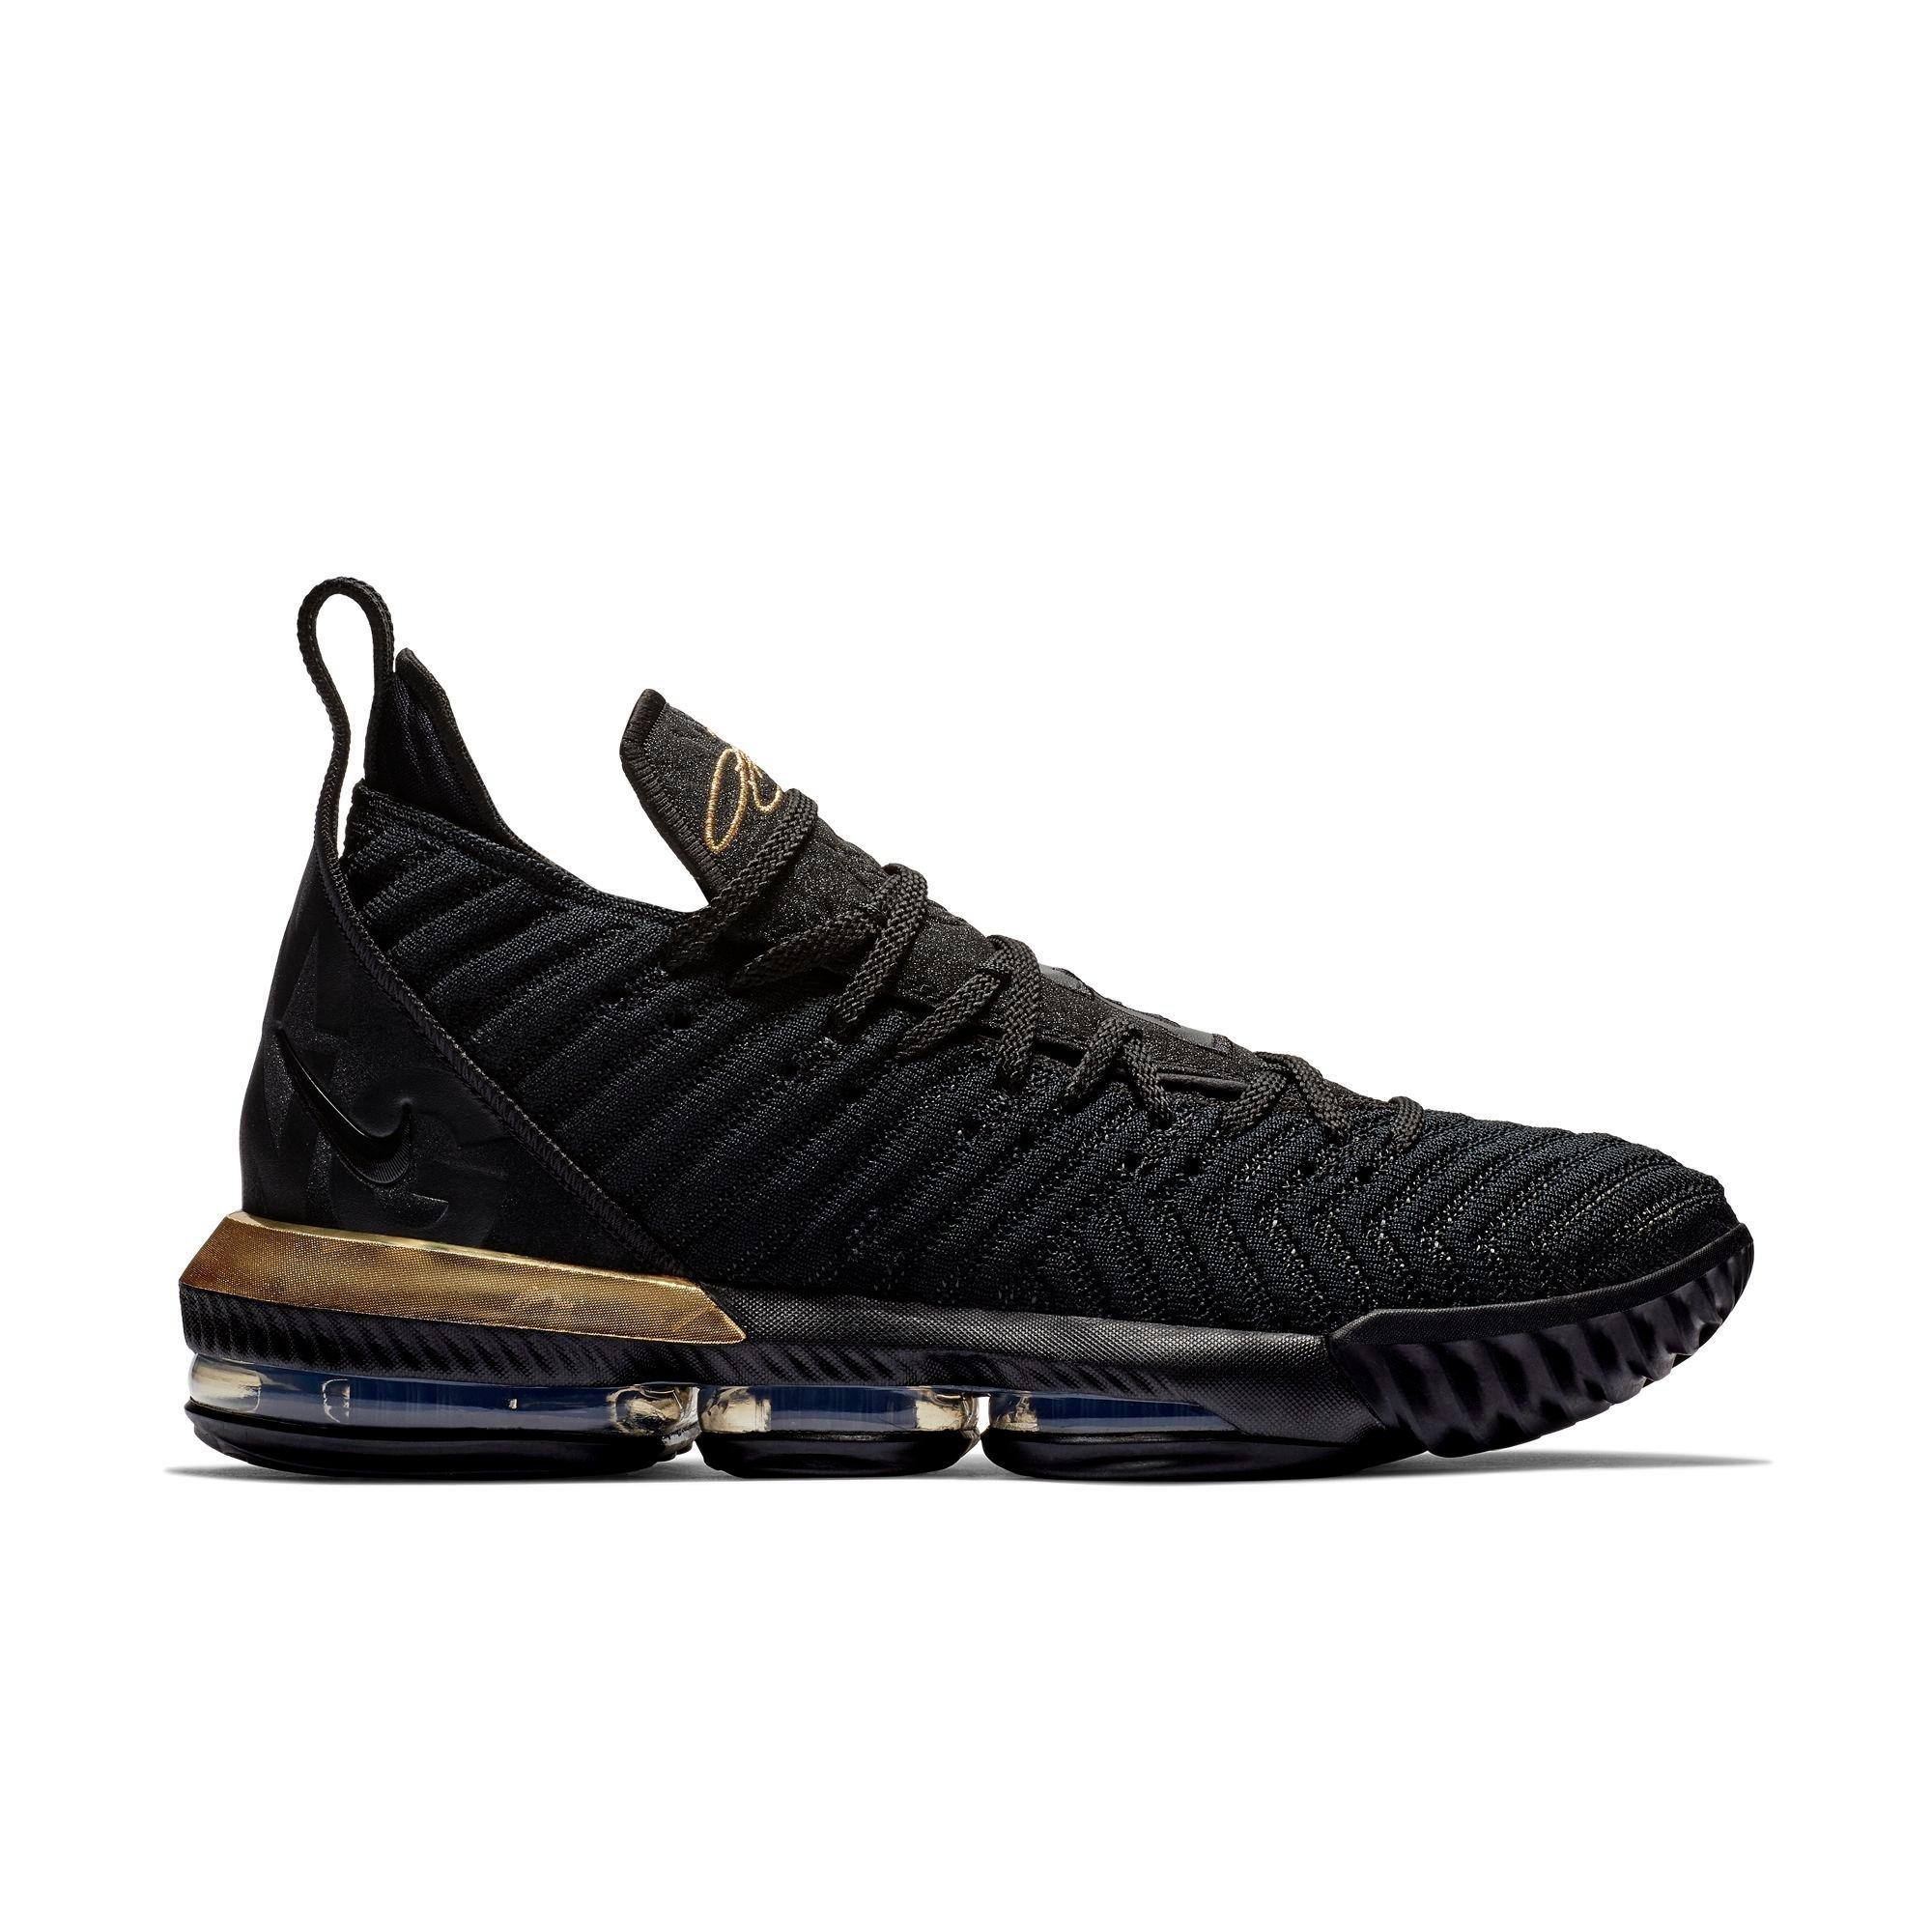 lebron james shoes black and gold buy 